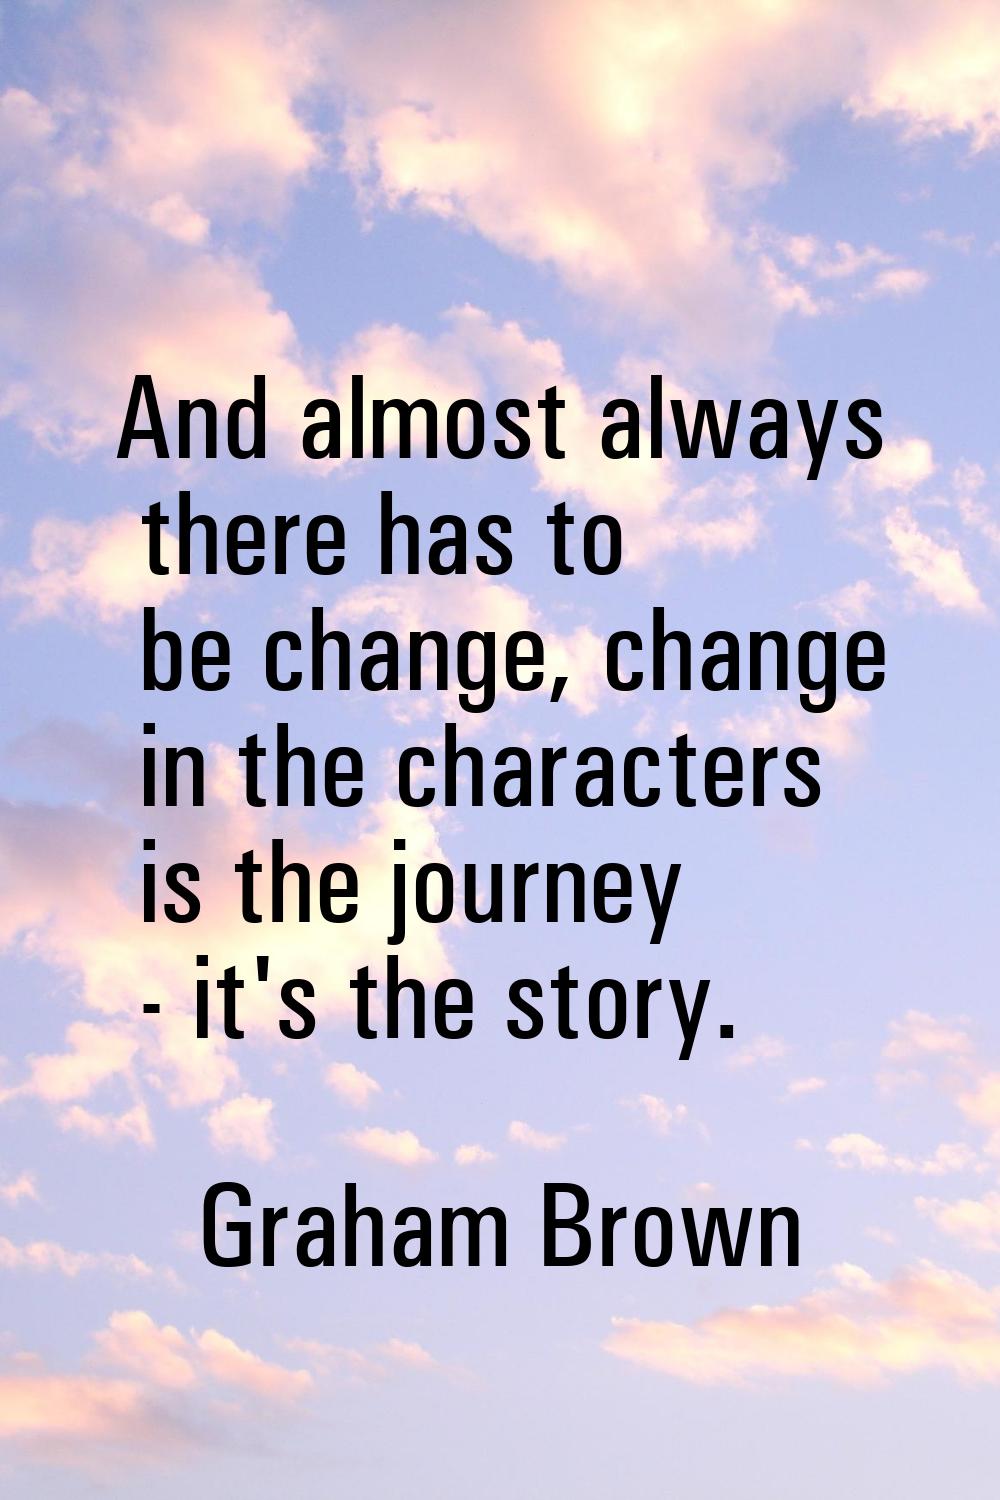 And almost always there has to be change, change in the characters is the journey - it's the story.